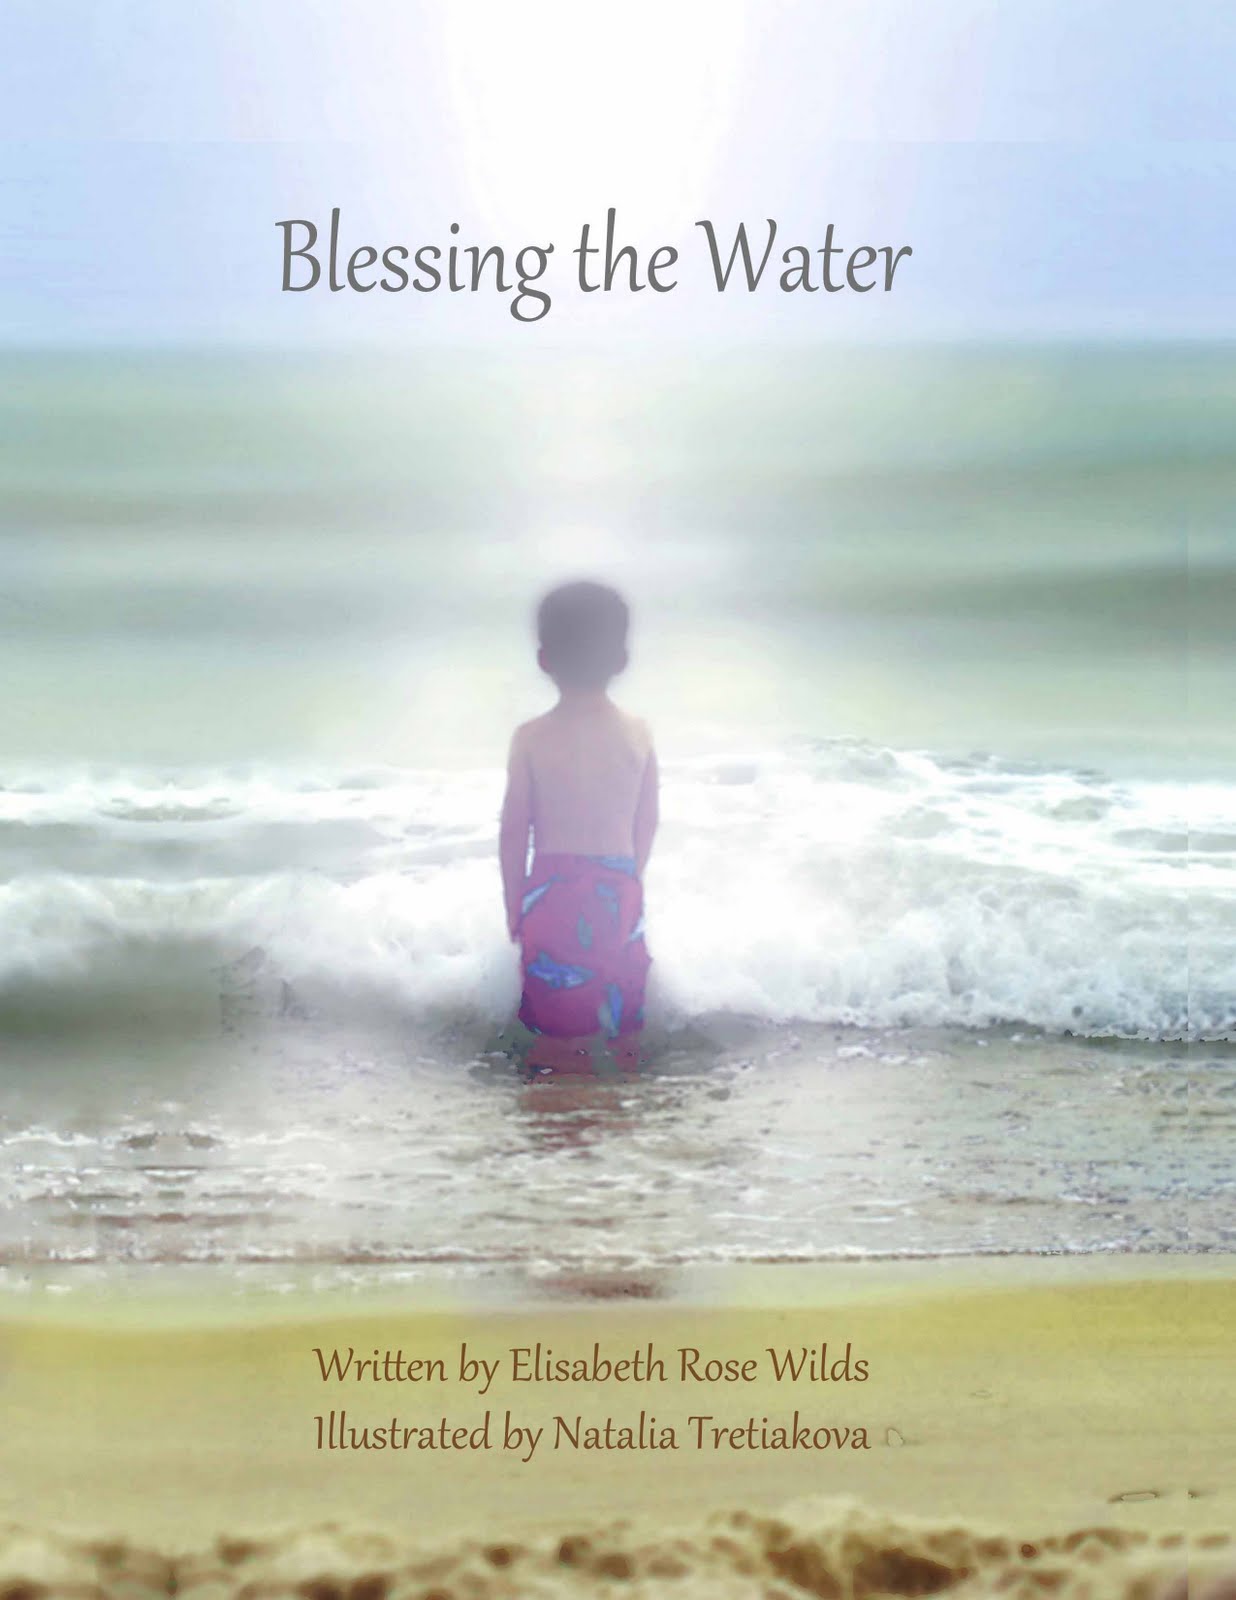 water is blessing essay